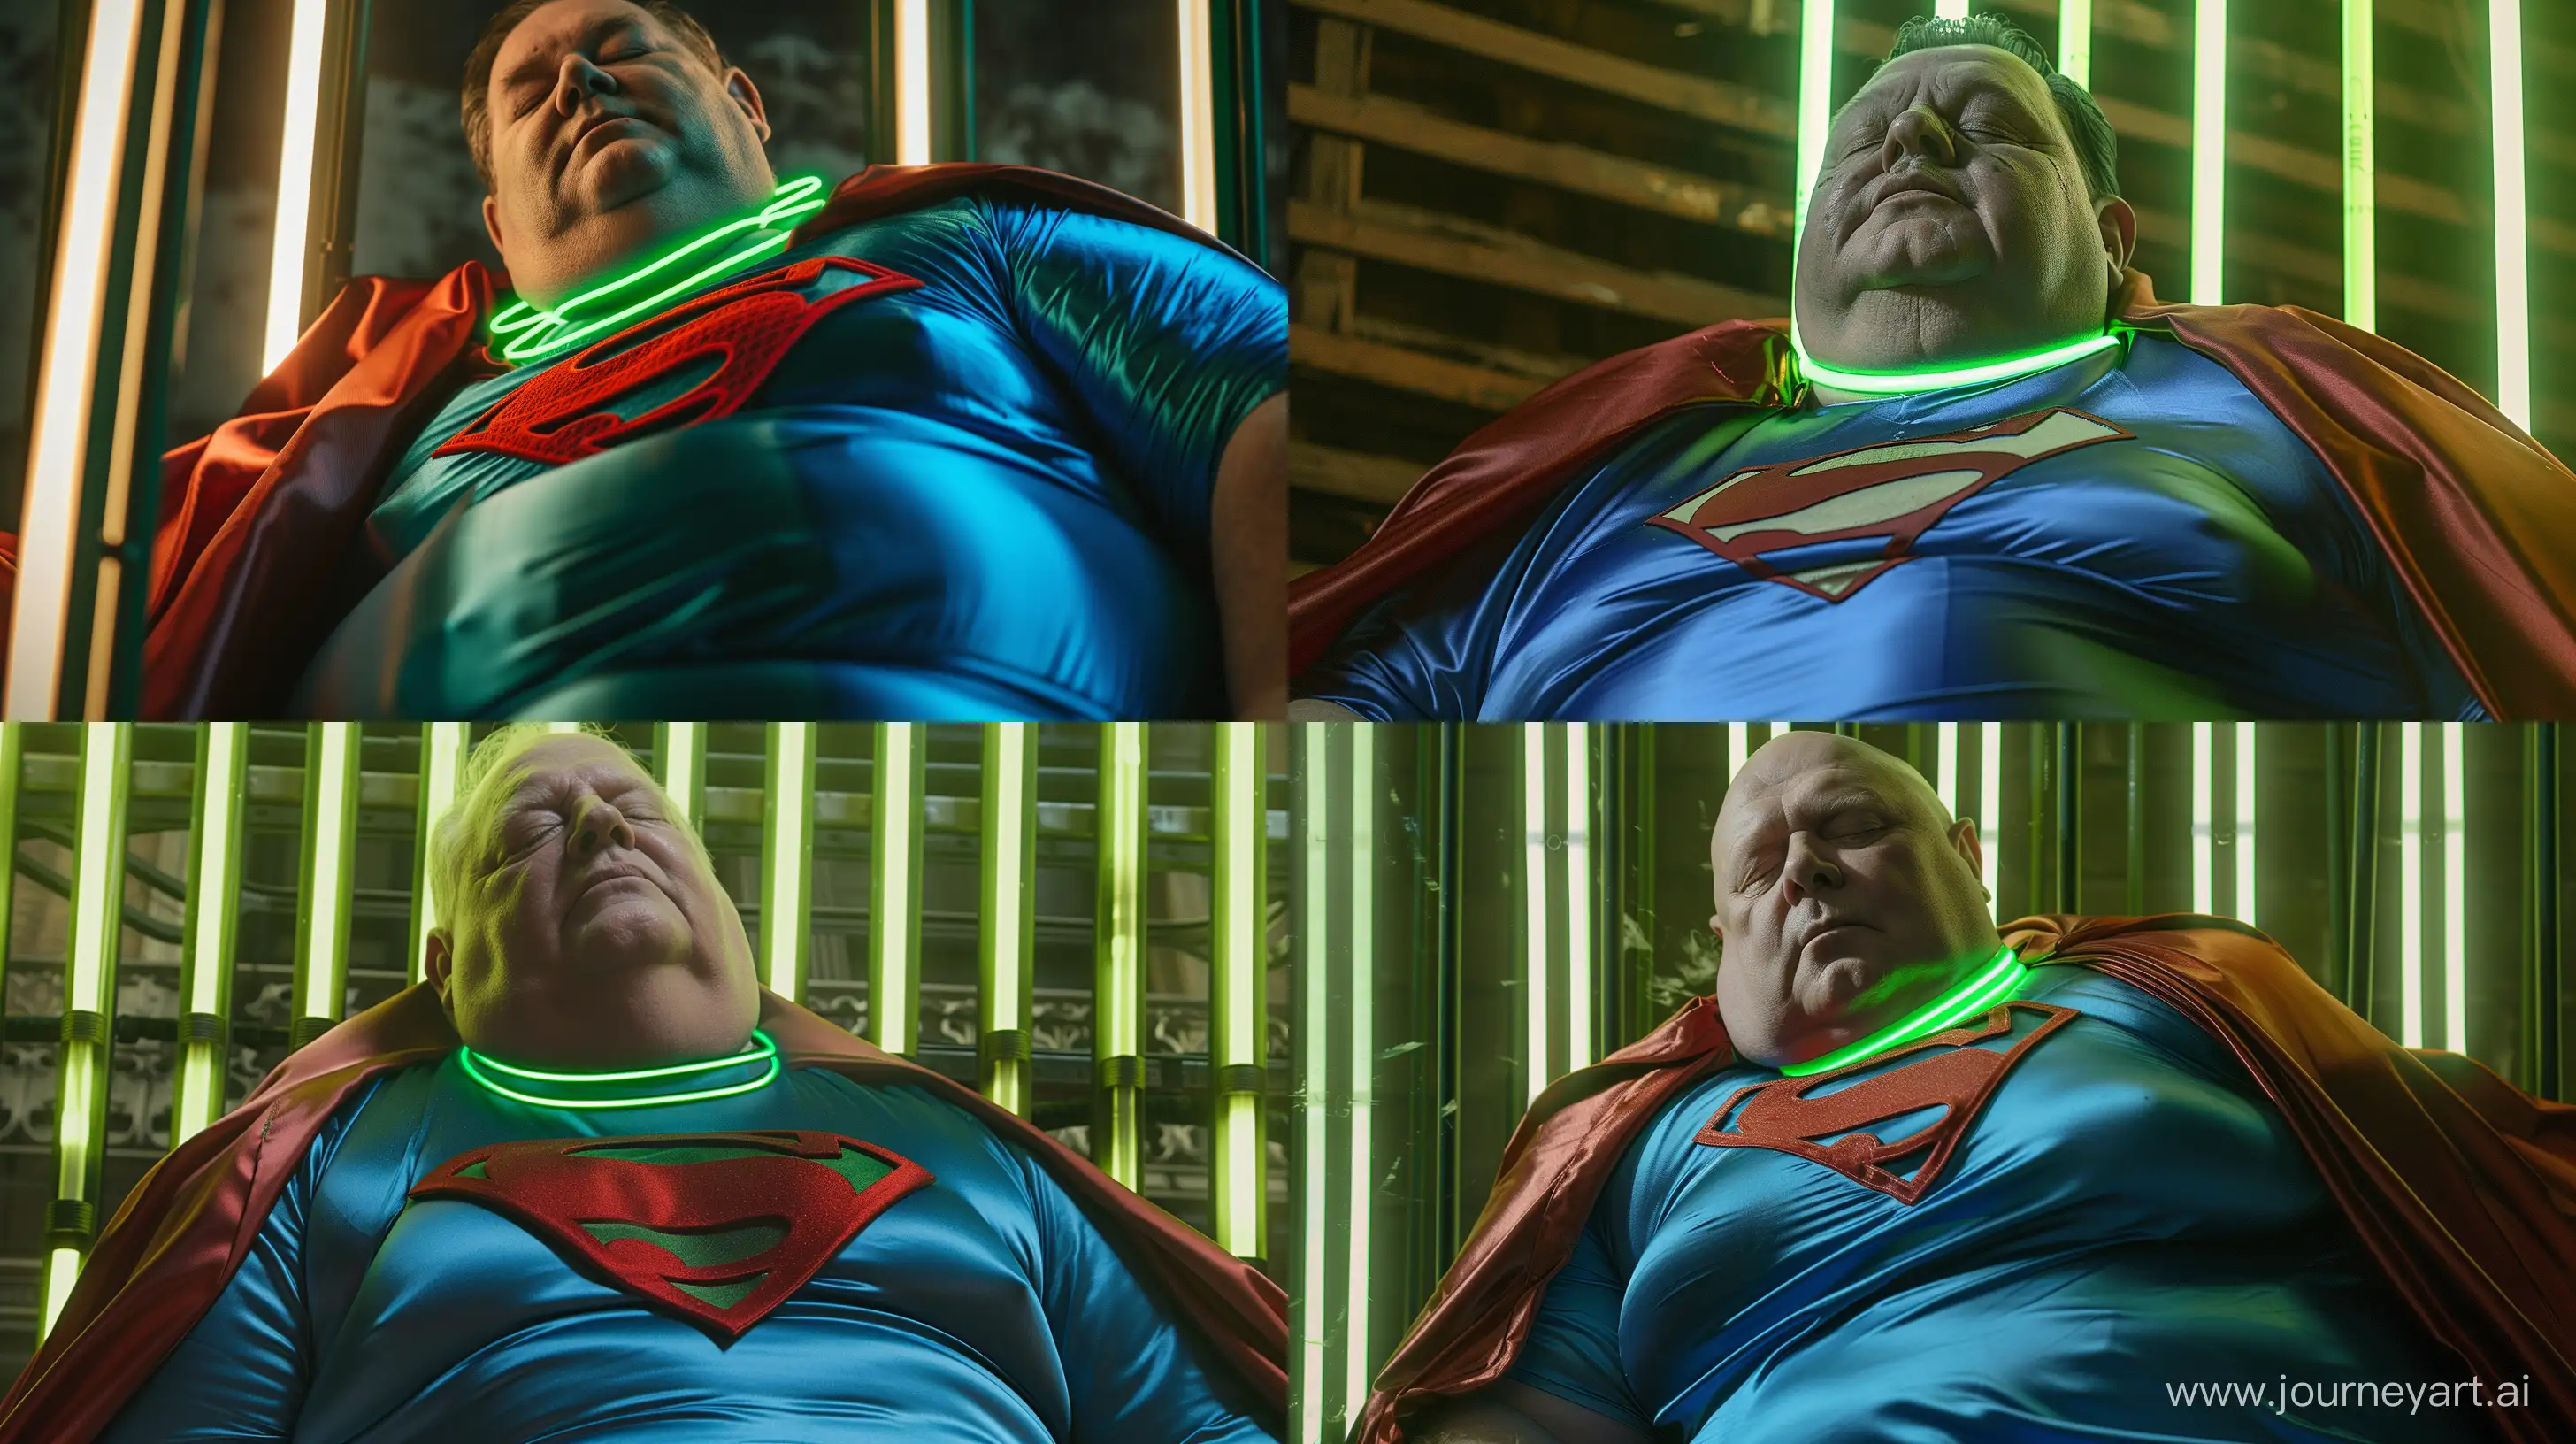 Elderly-Superman-Resting-Against-Glowing-Neon-Bars-in-Outdoor-Daylight